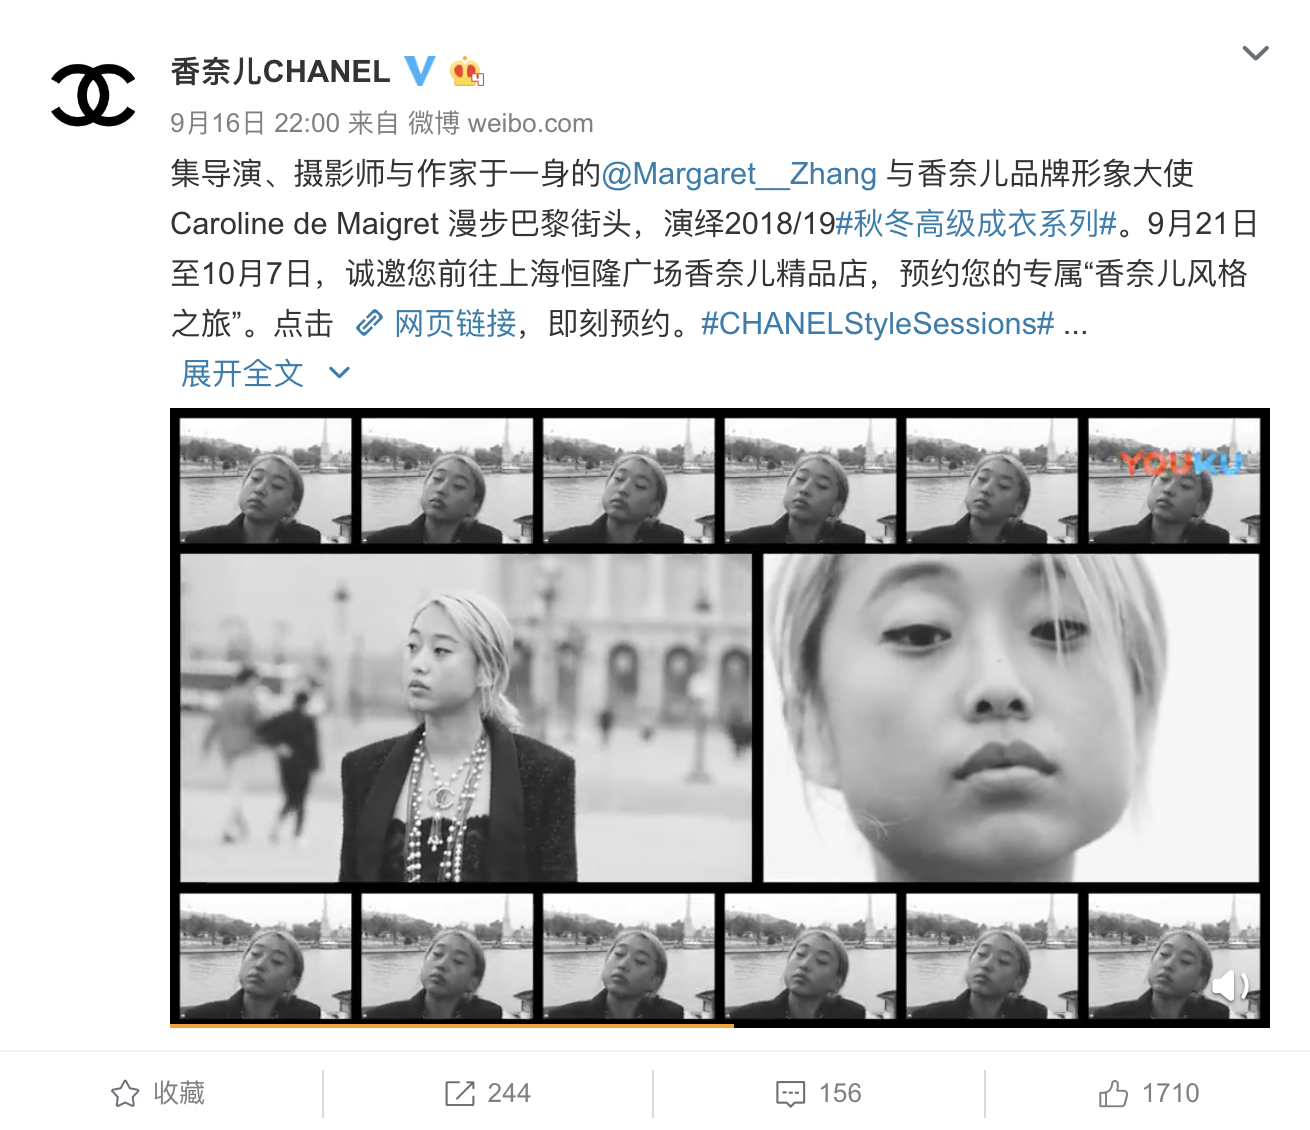 Chanel reposts video content on Youku and on its Weibo page featuring Australian photographer and influencer Margaret Zhang